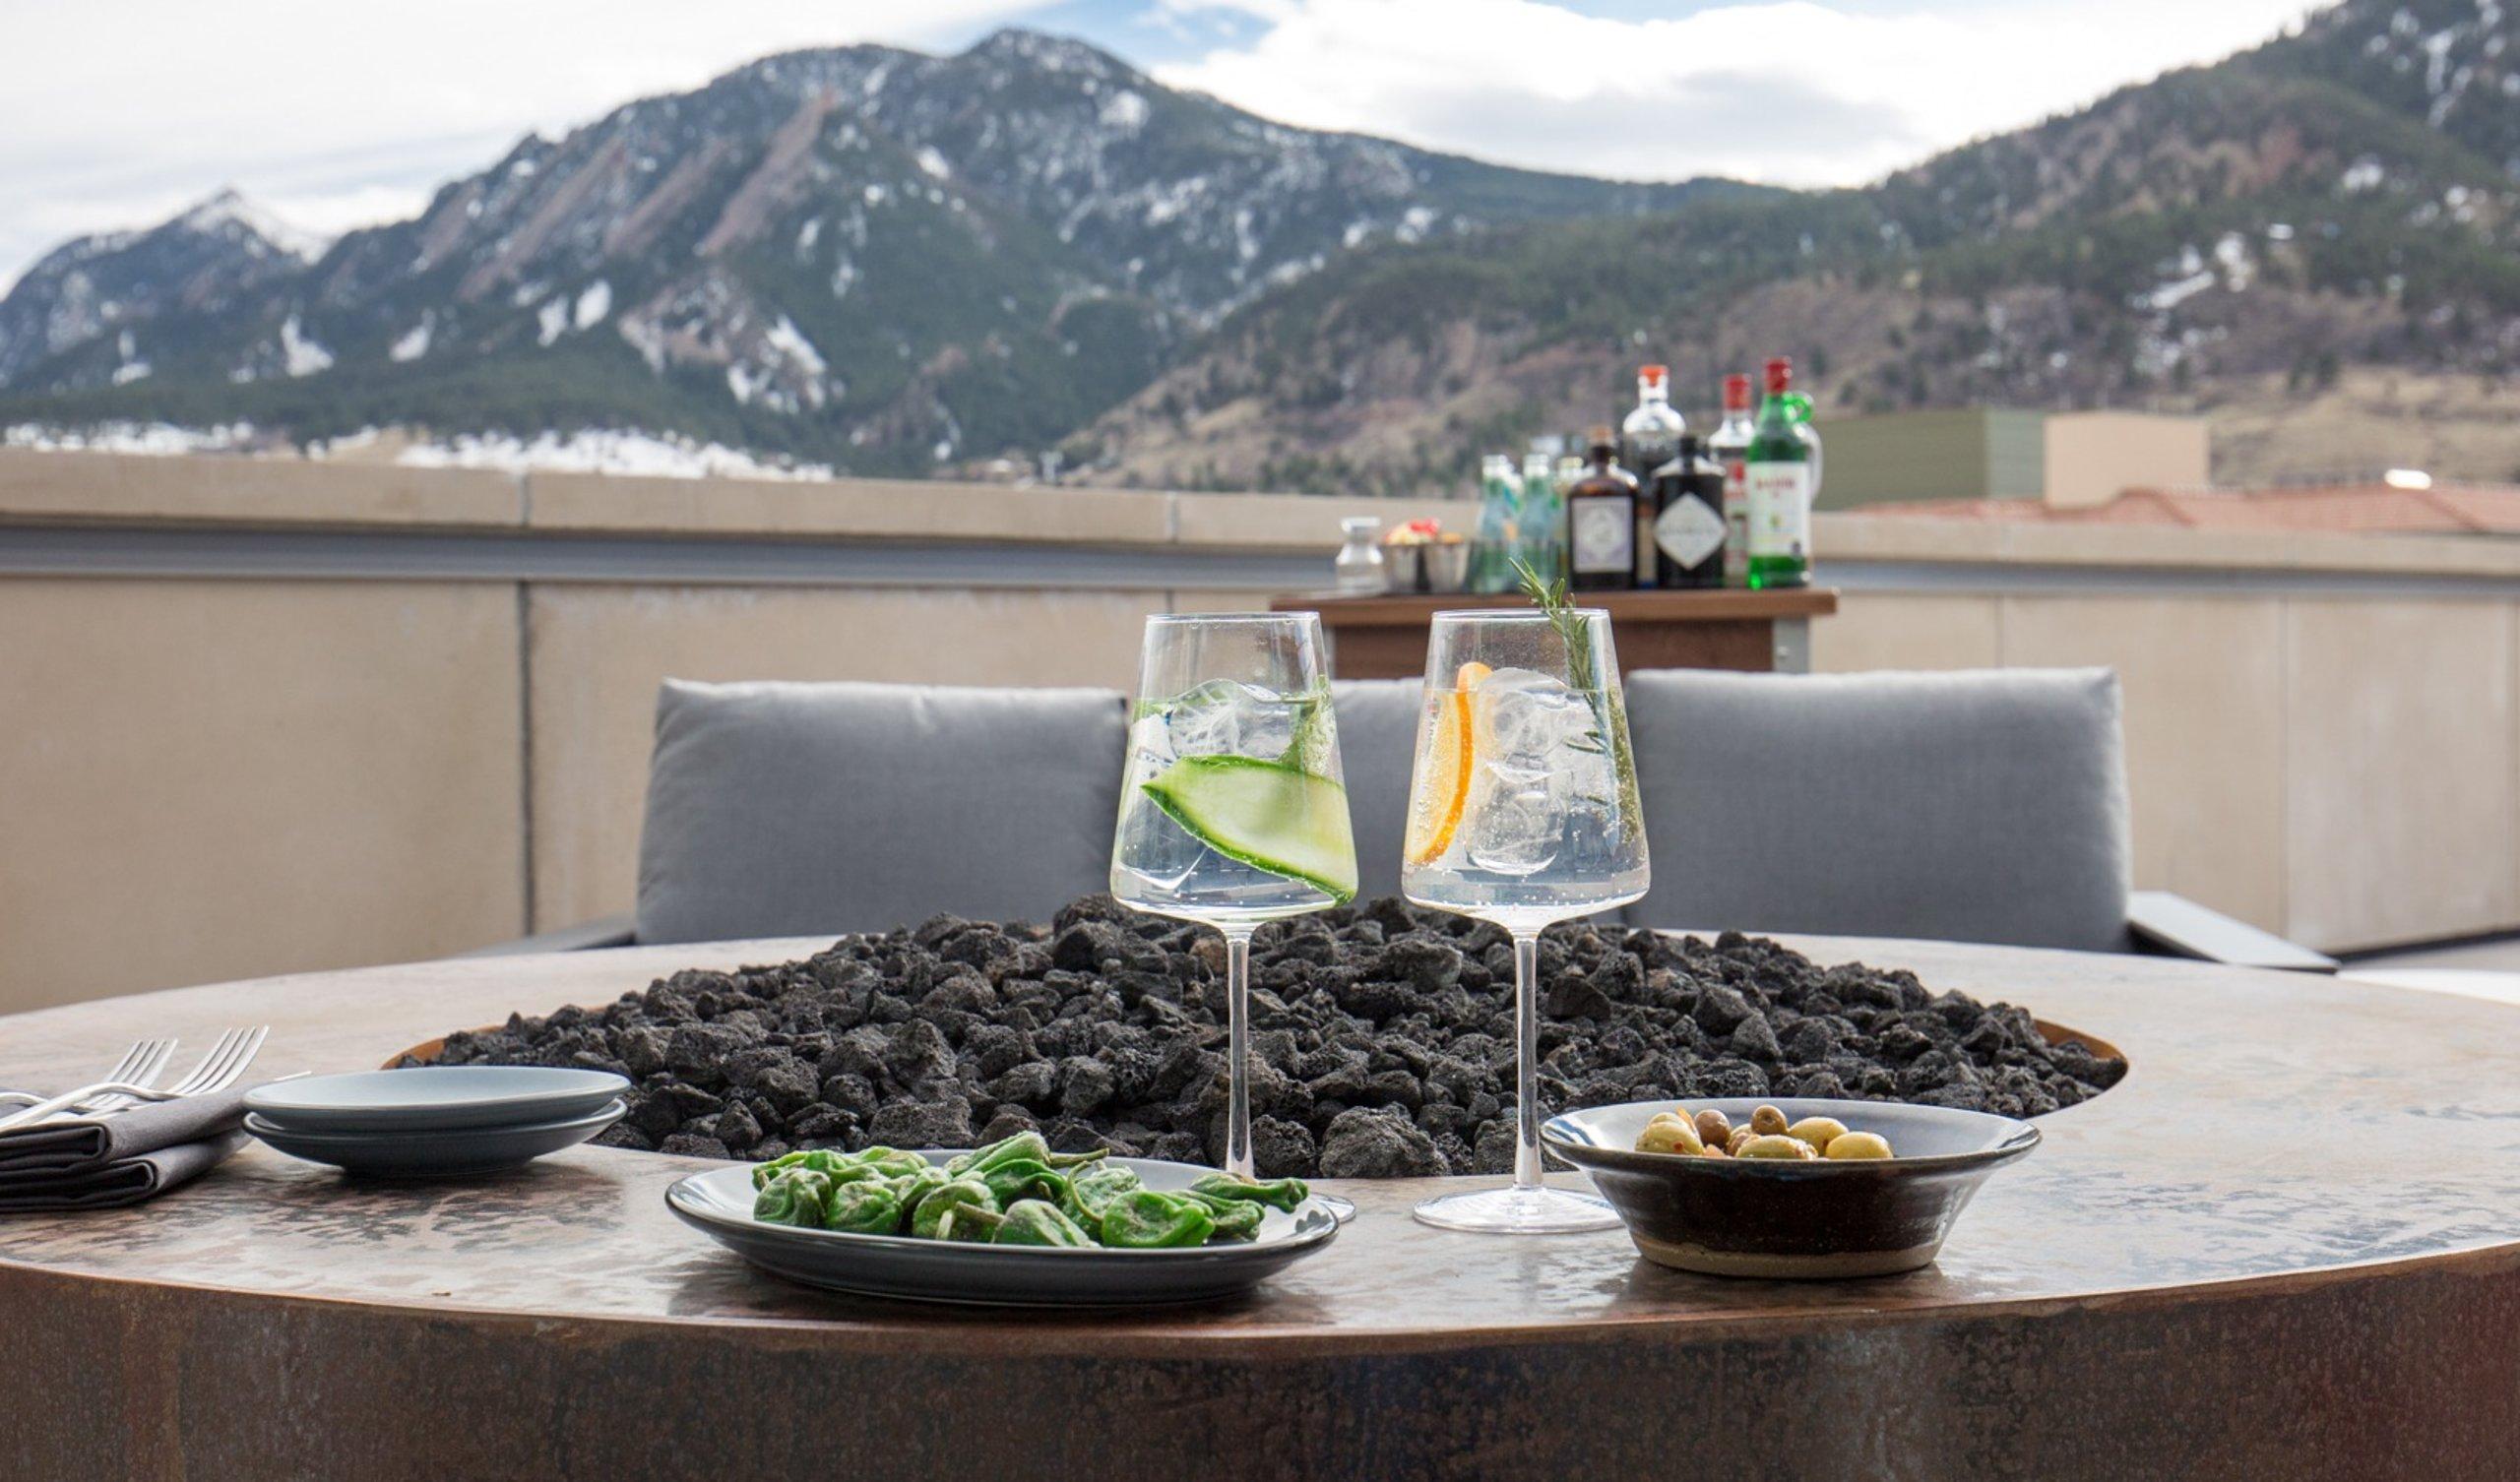 Outdoor table view with mountains in background